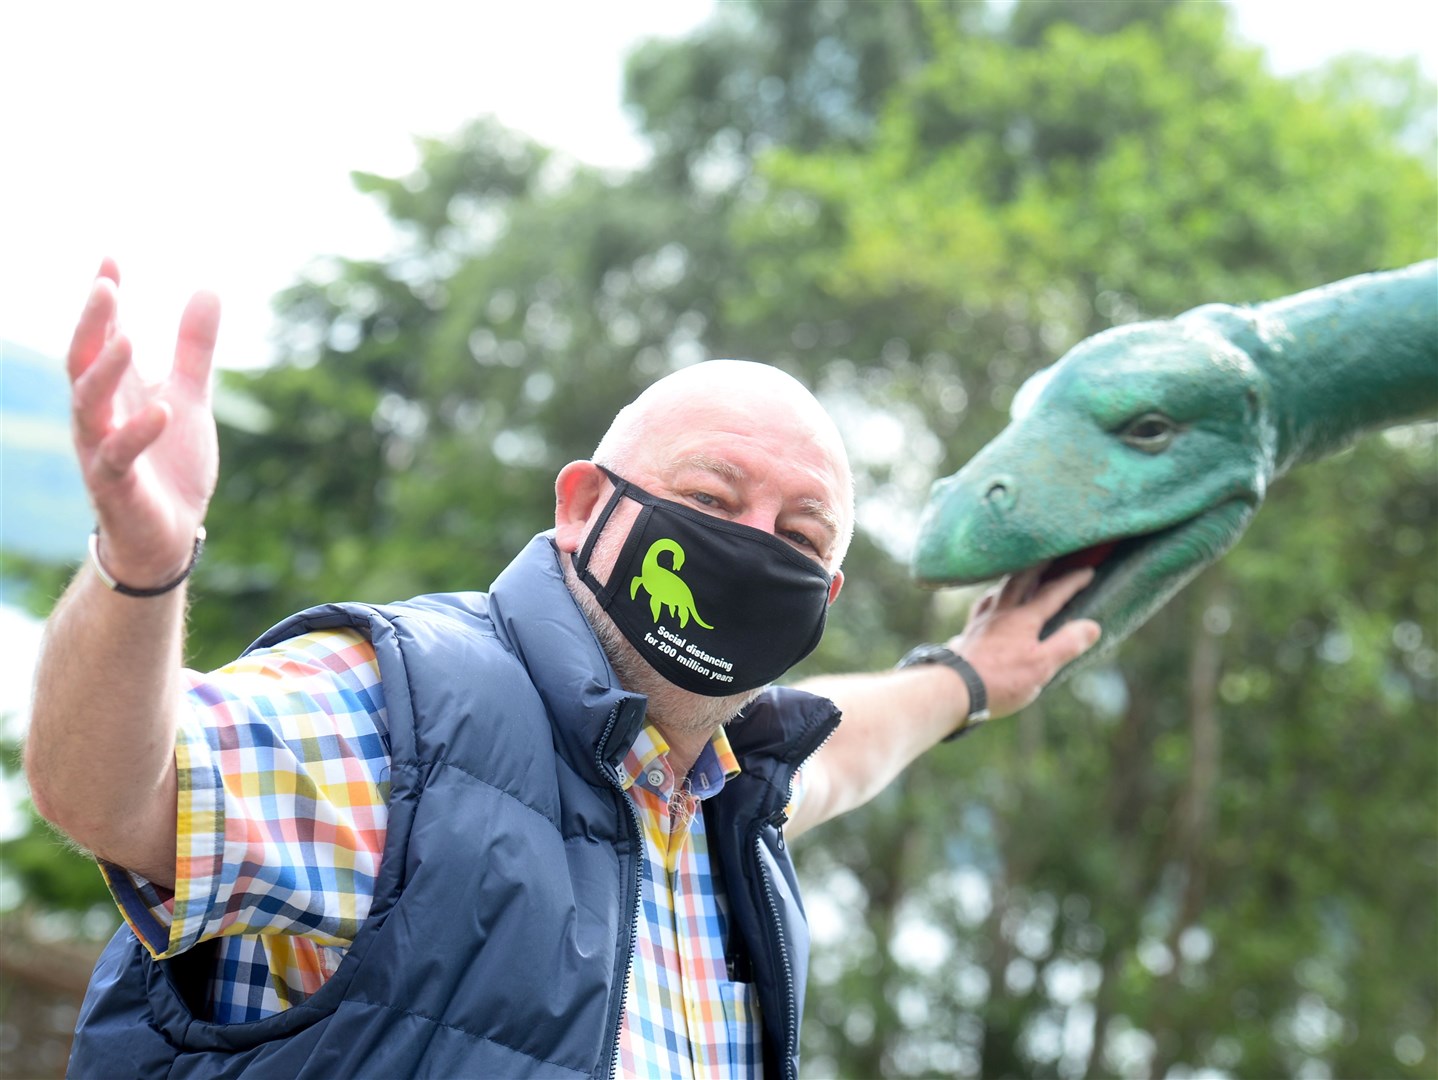 Willie Cameron models one of the Nessie facemasks on the banks of Loch Ness.